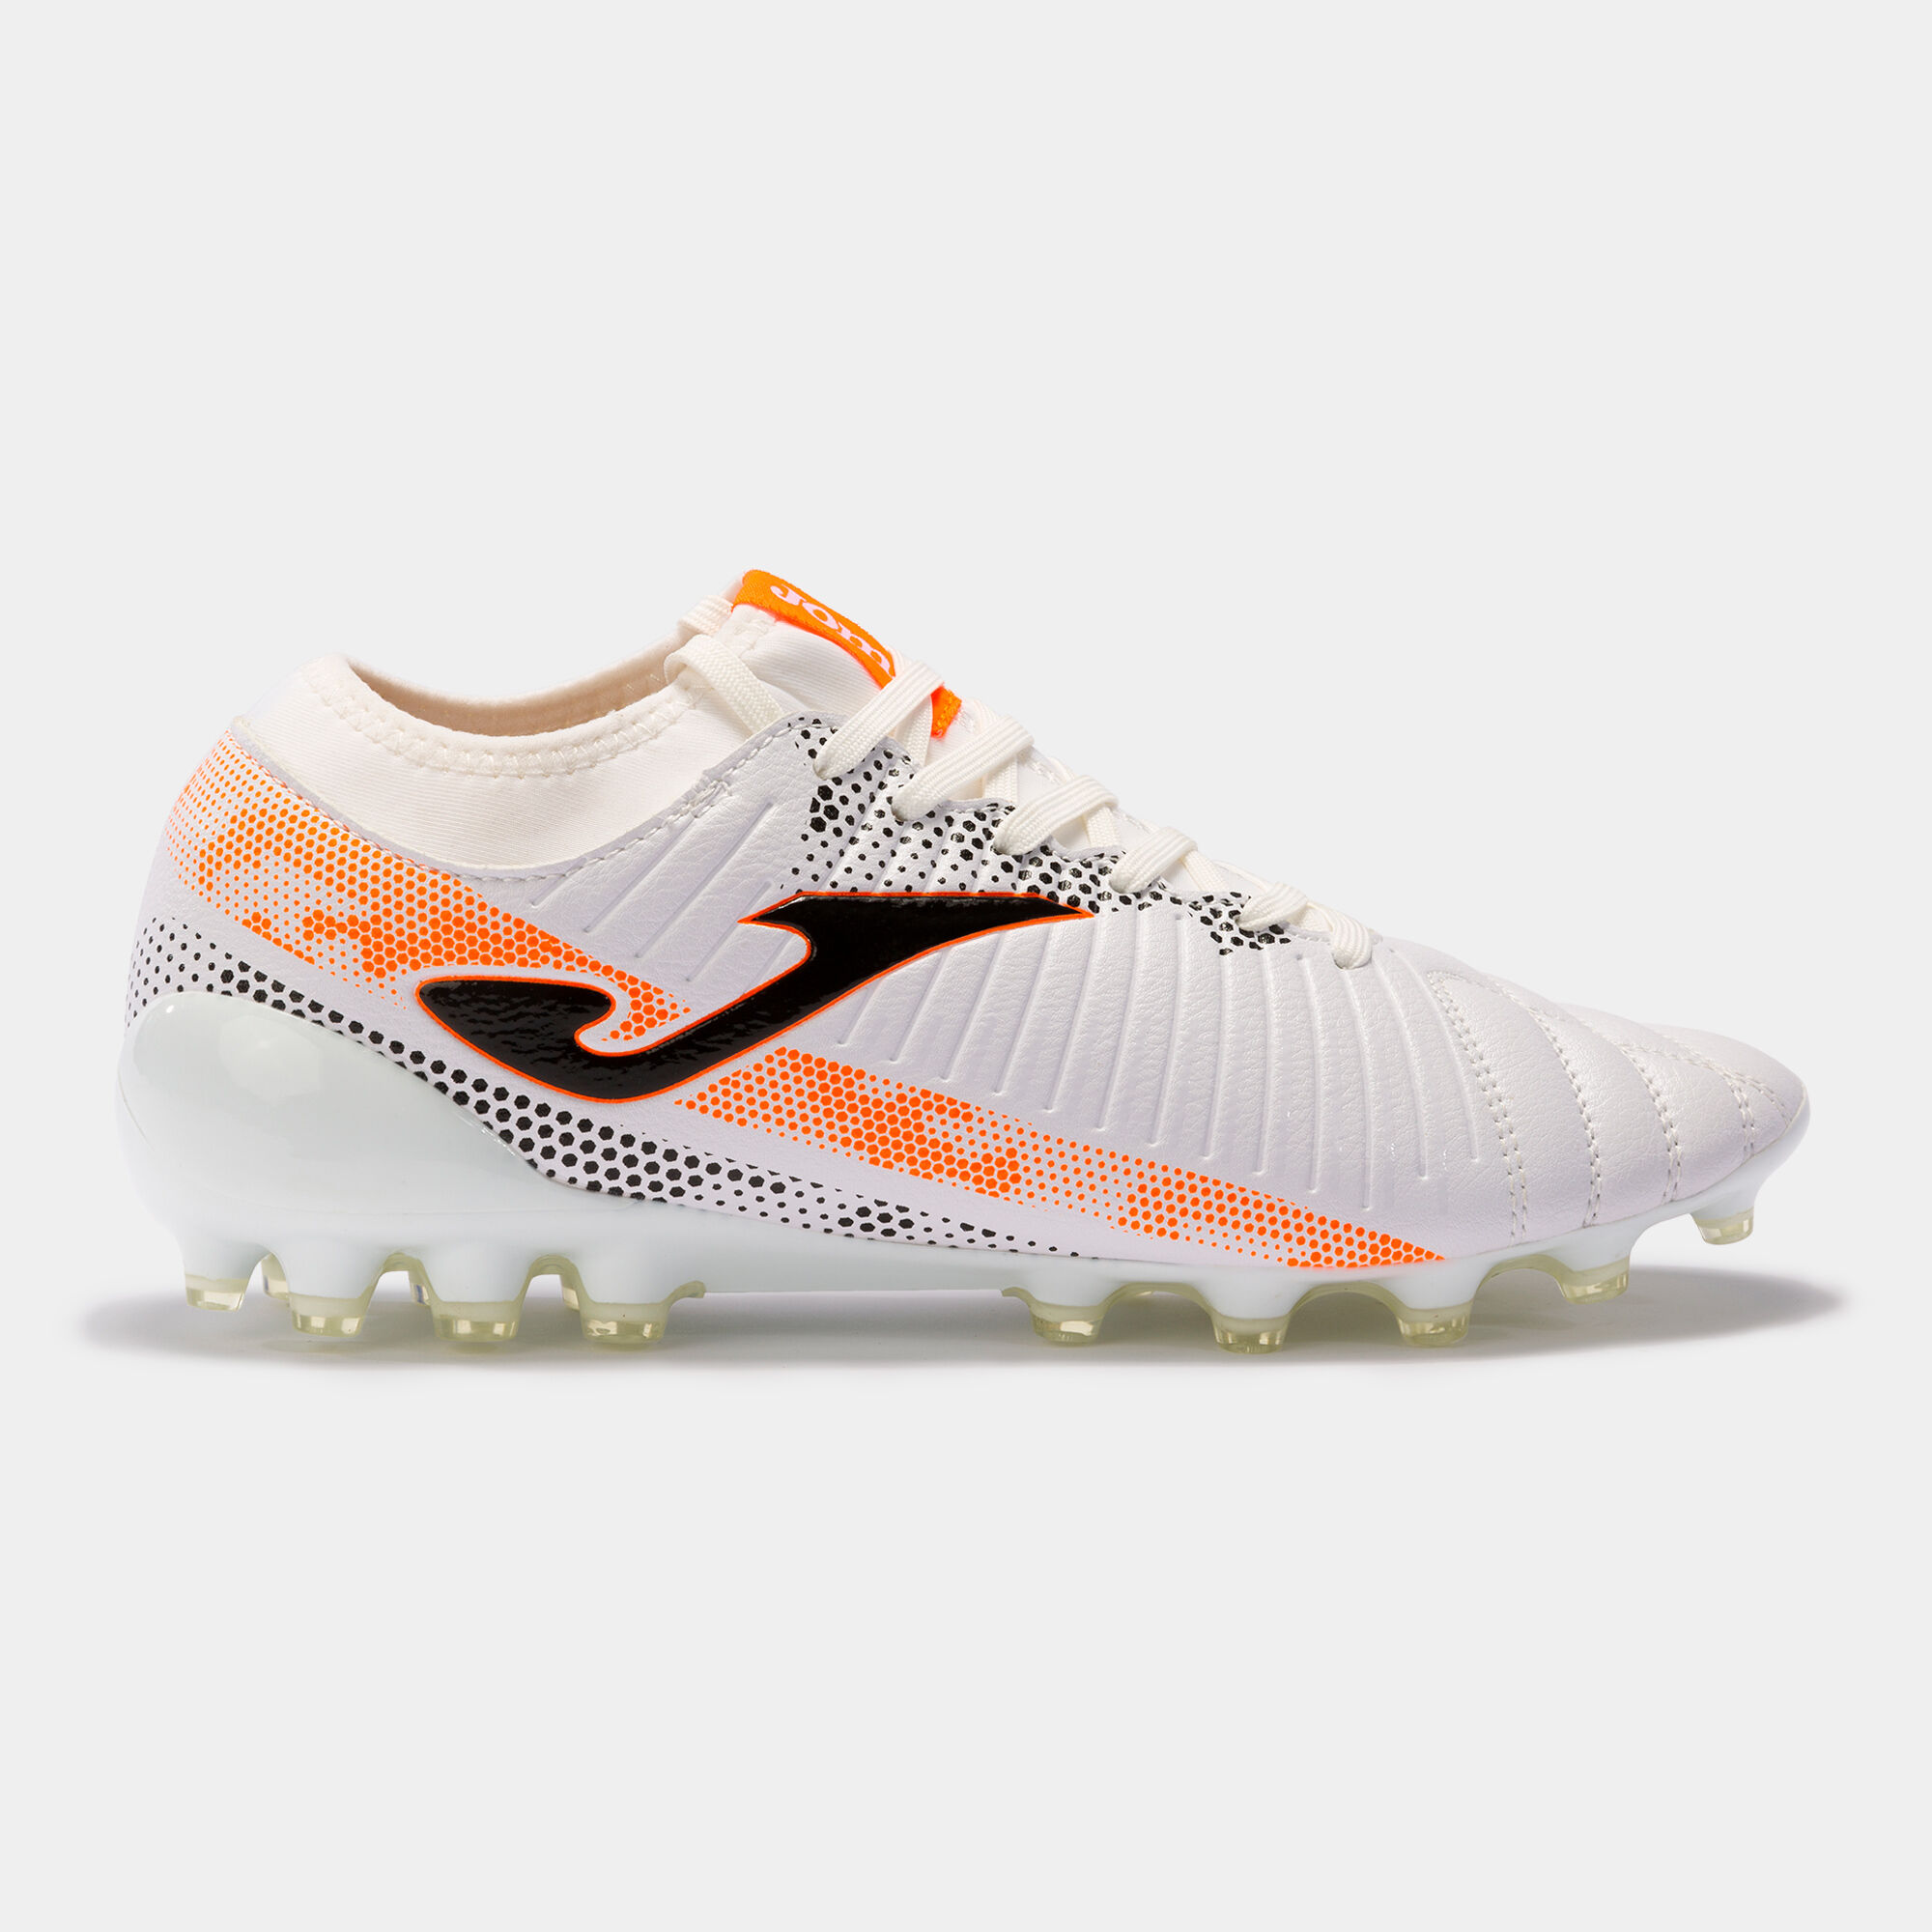 FOOTBALL BOOTS PROPULSION CUP 21 ARTIFICIAL GRASS WHITE ORANGE